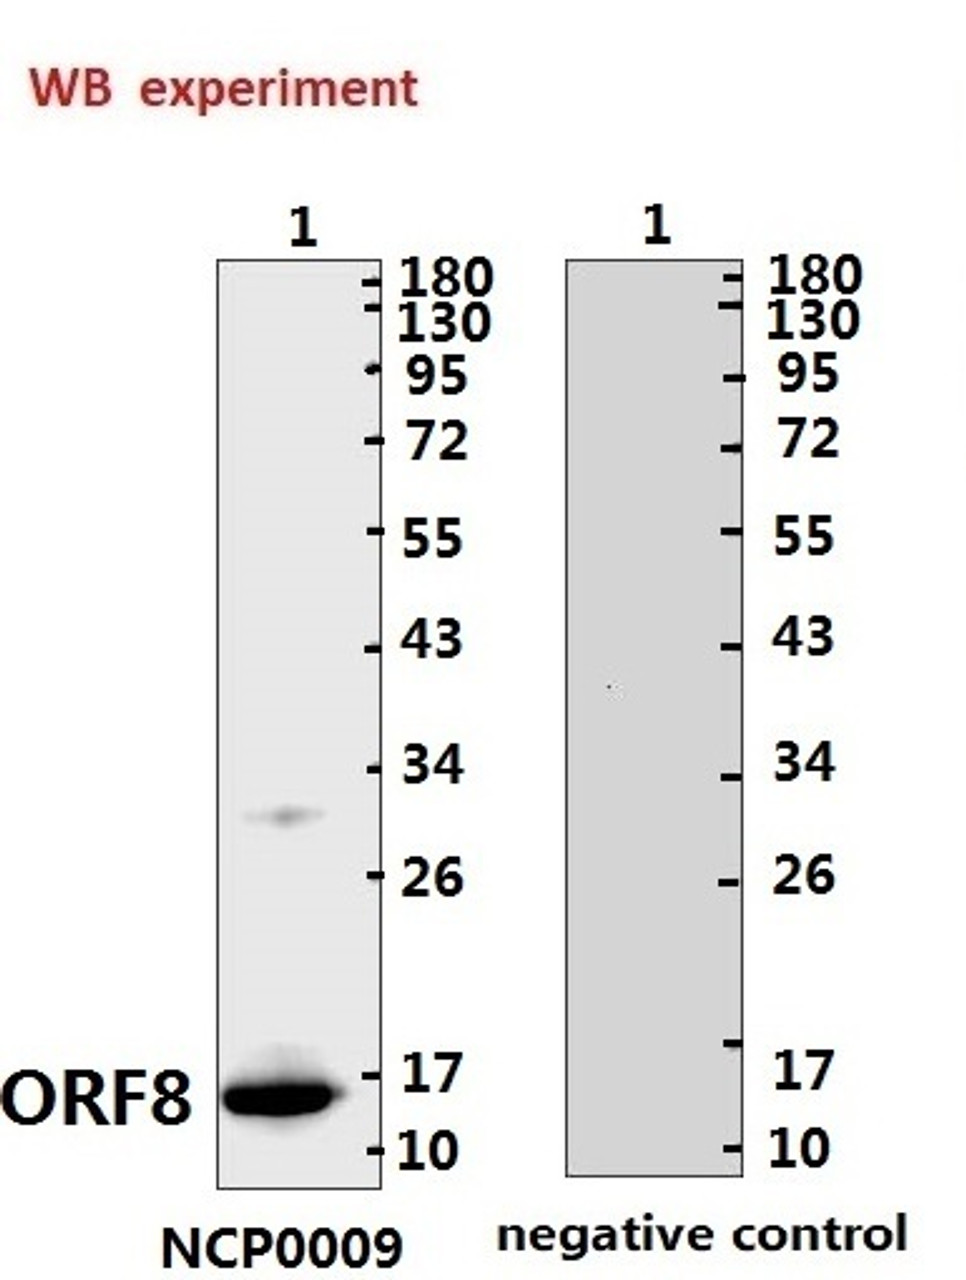 <strong>Figure 1 Western Blot Validation with Recombinant Protein</strong><br>Loading: 1ug of recombinant protein per lane. Antibodies: SARS-CoV-2 (COVID-19) ORF8 Antibody (IN) , 10-511, 1:500. Secondary: Goat anti-rabbit IgG HRP conjugate at 1:20000 dilution.